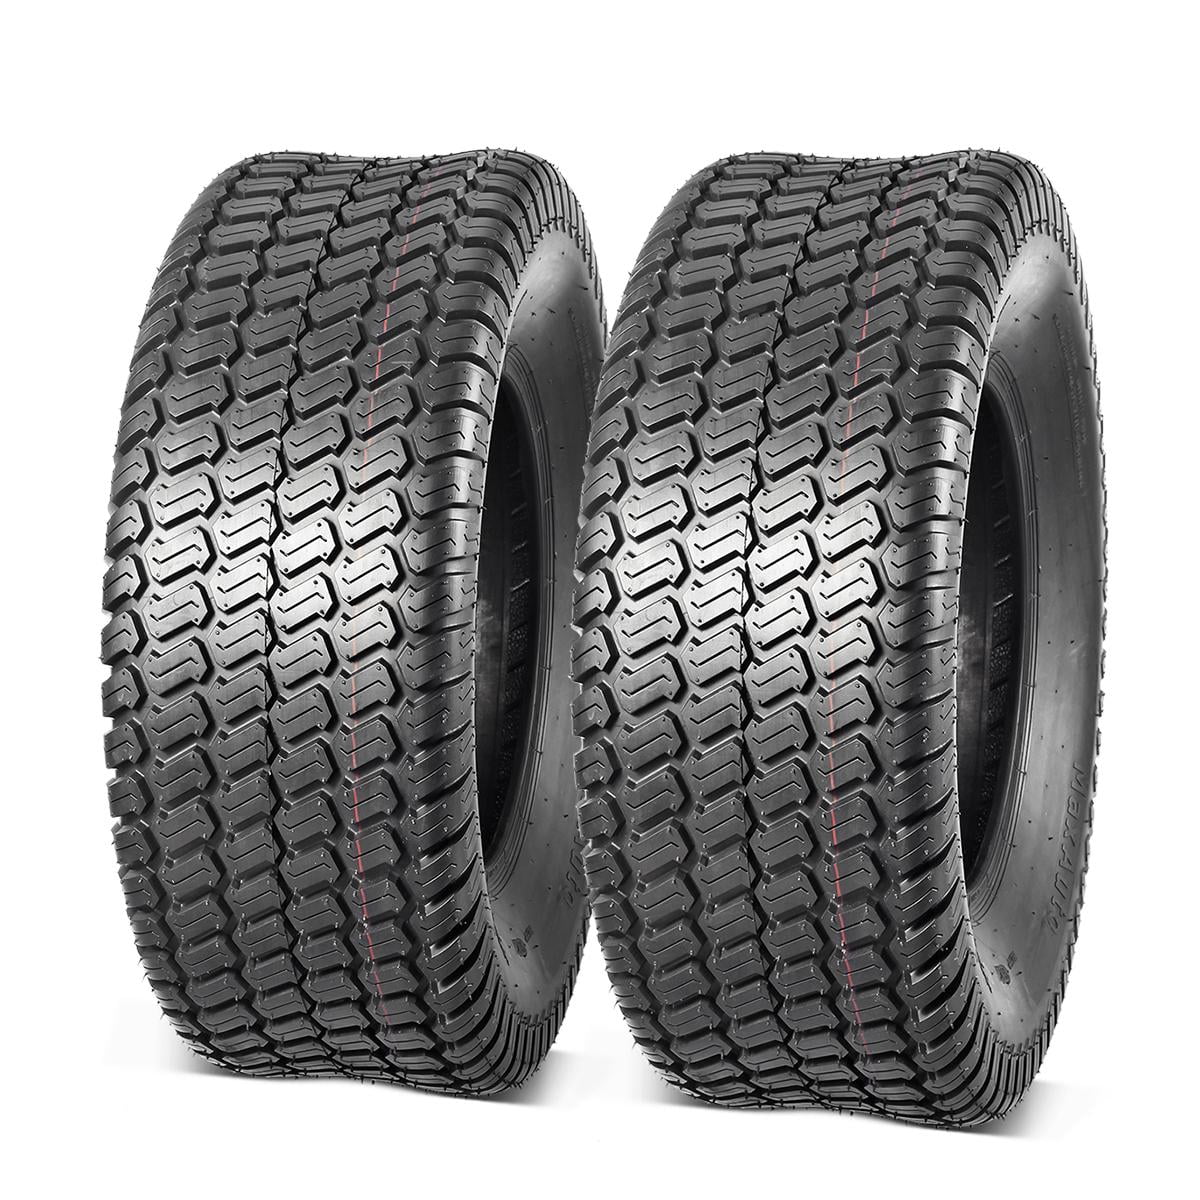 2pcs 13X5.00-6 13X6.50-6 Tyre Road Tire For Gas Fuel Scooter Lawn Mower ATV 